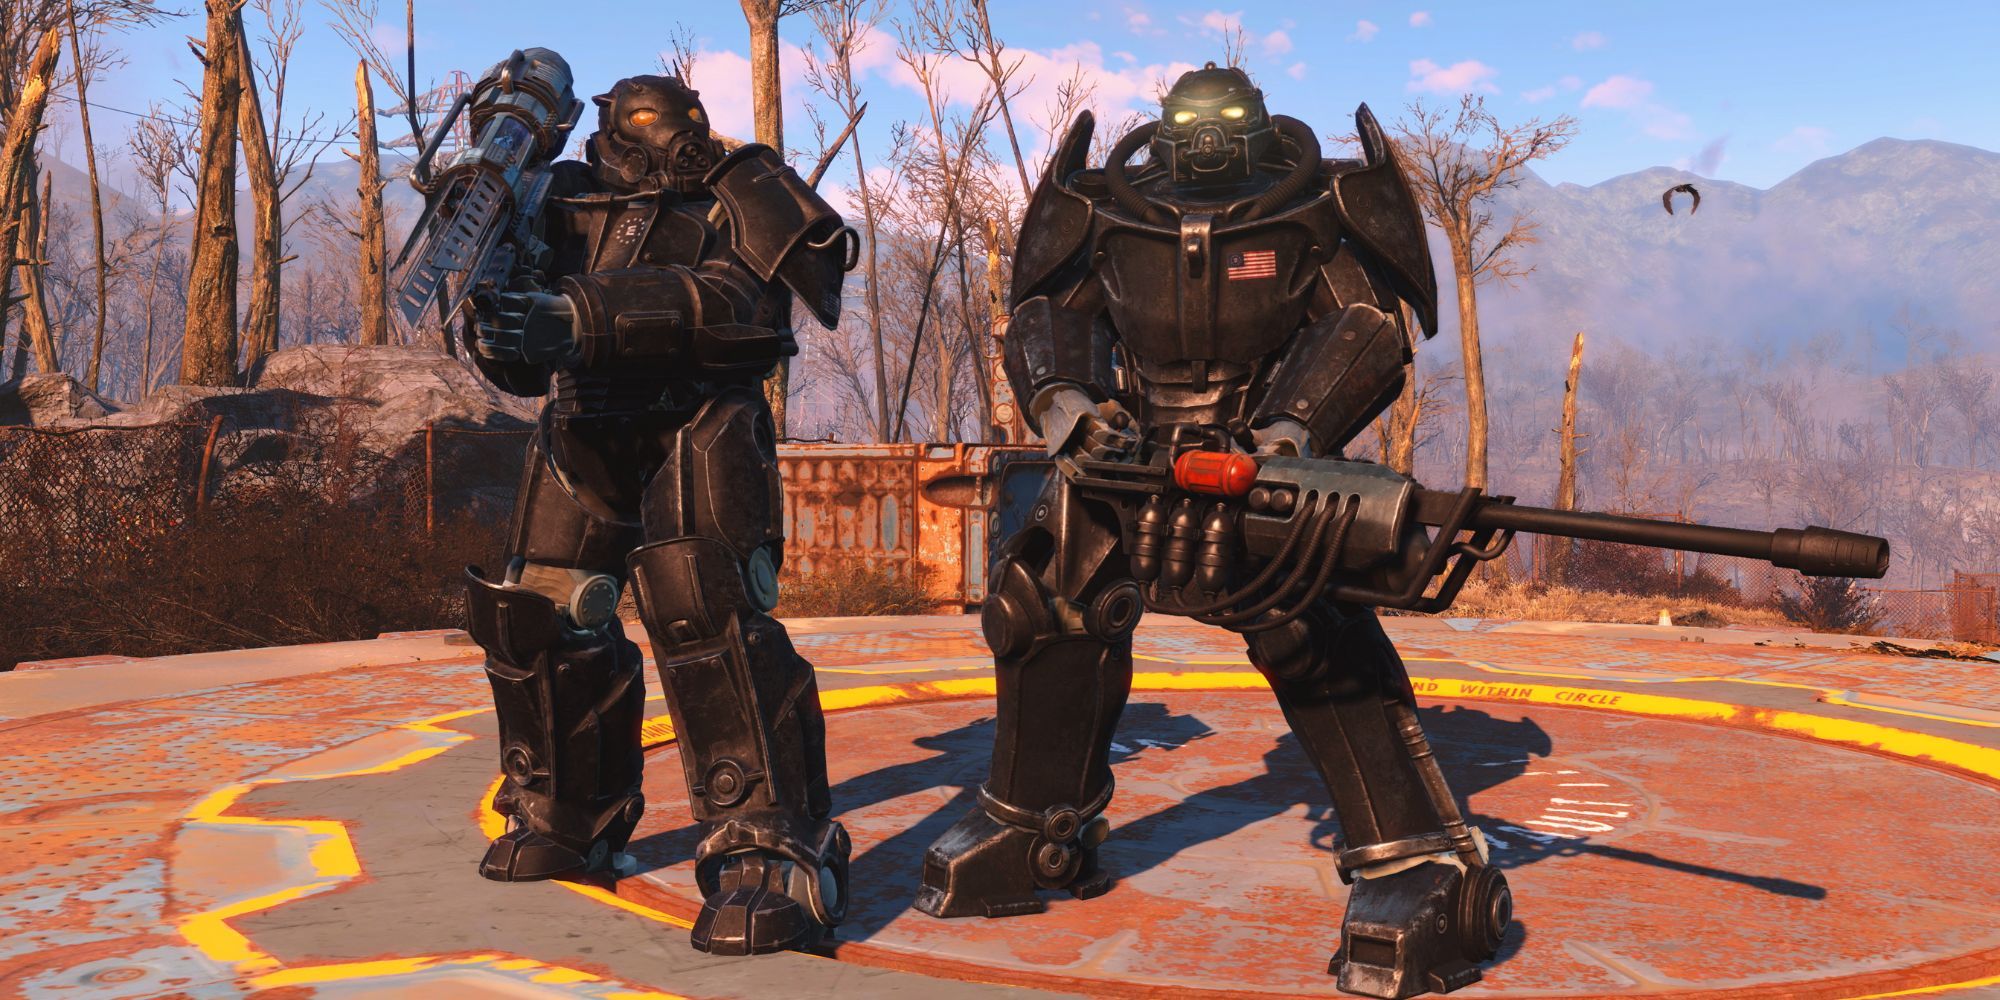 Armour in the current-gen update for Fallout 4.